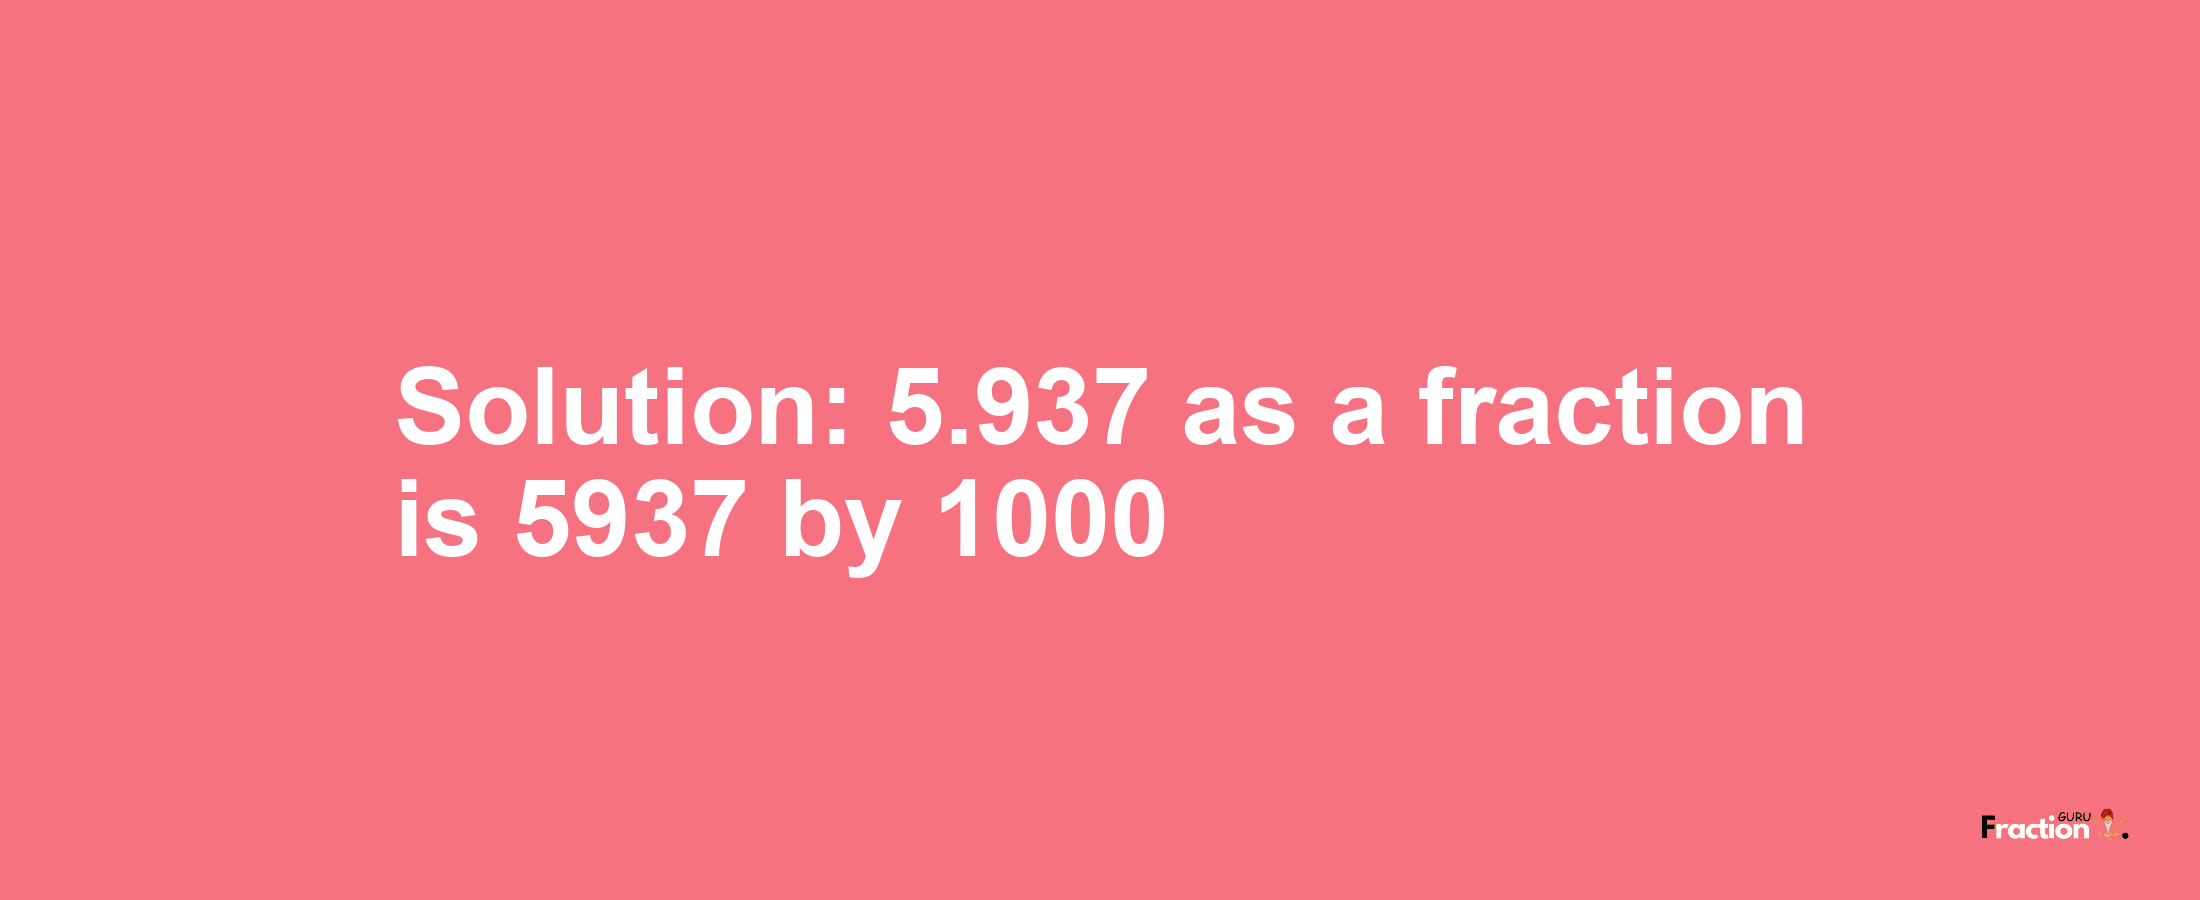 Solution:5.937 as a fraction is 5937/1000